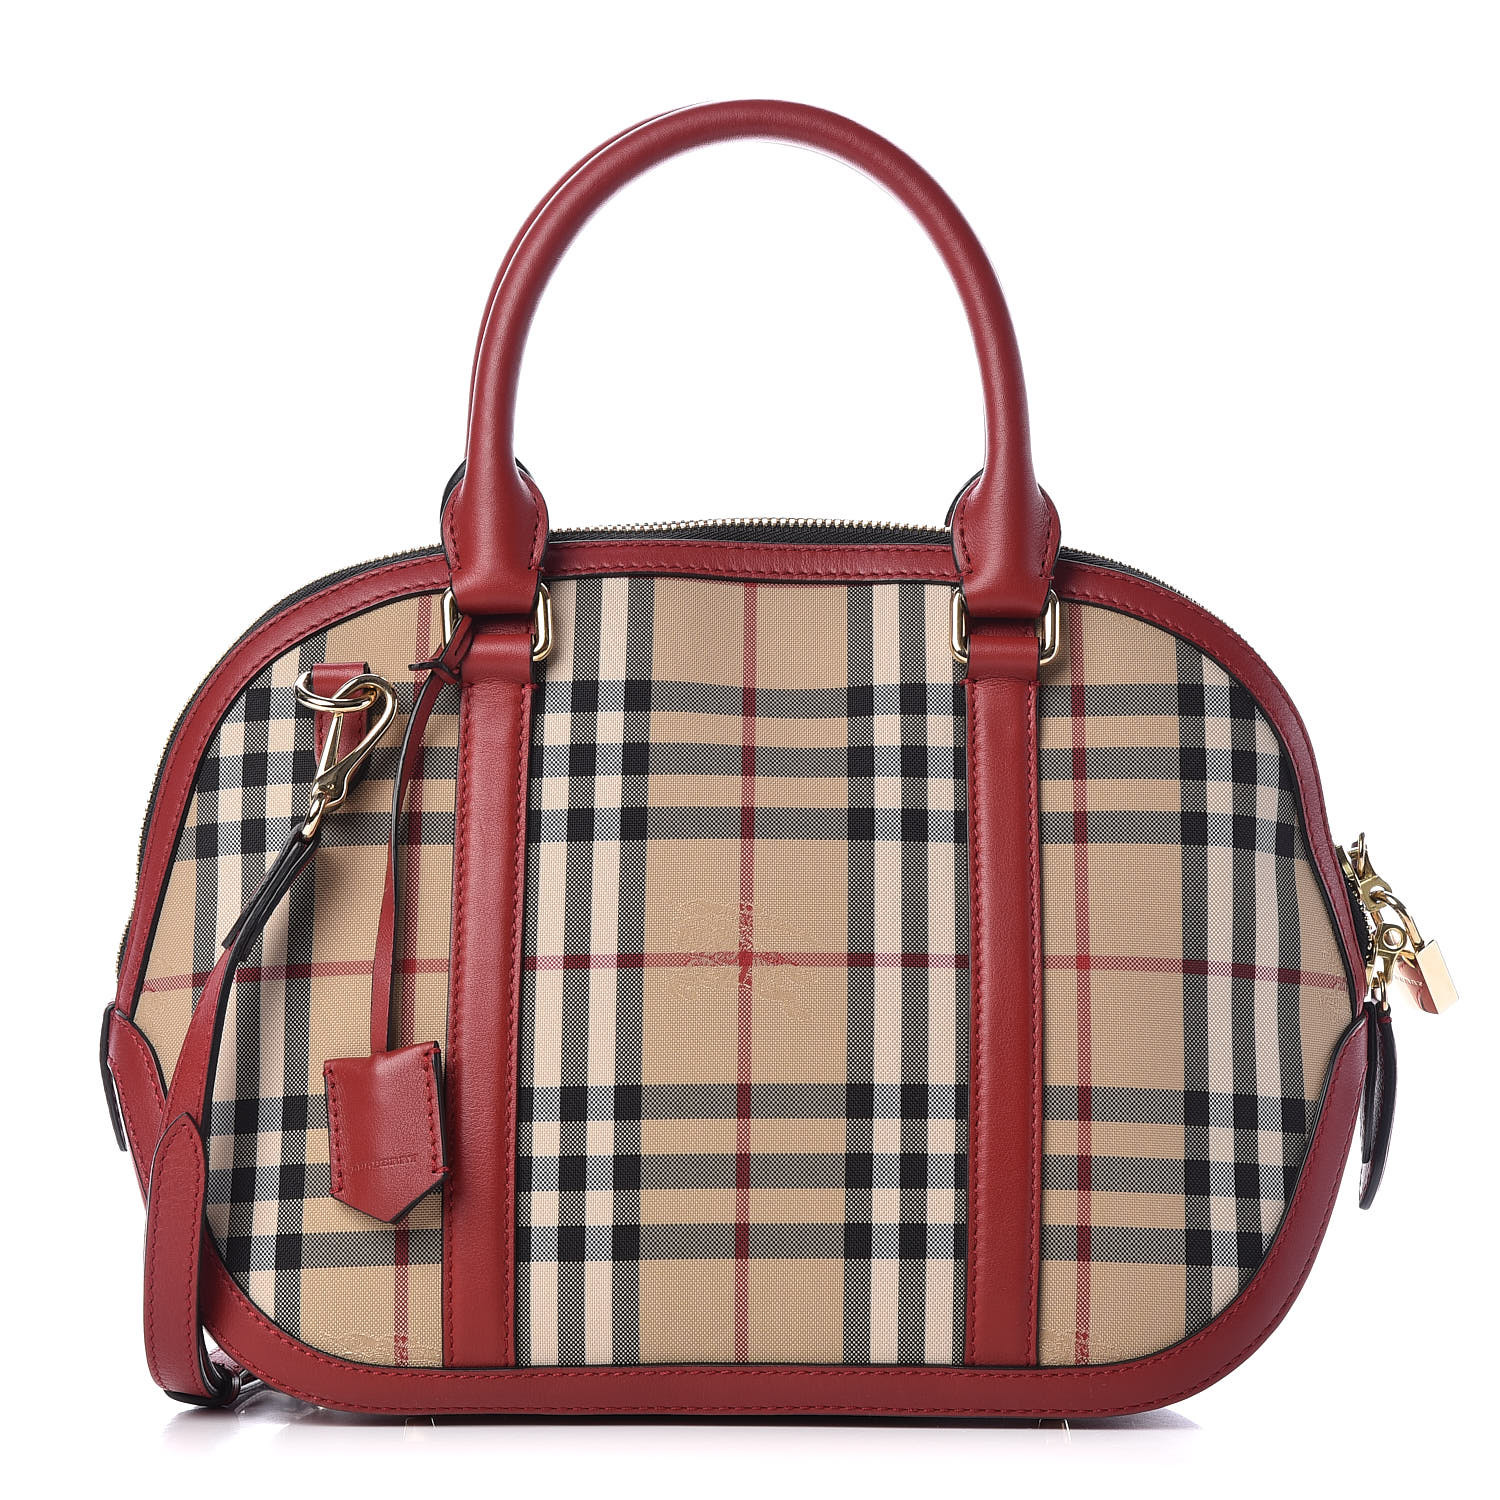 burberry orchard bowling bag